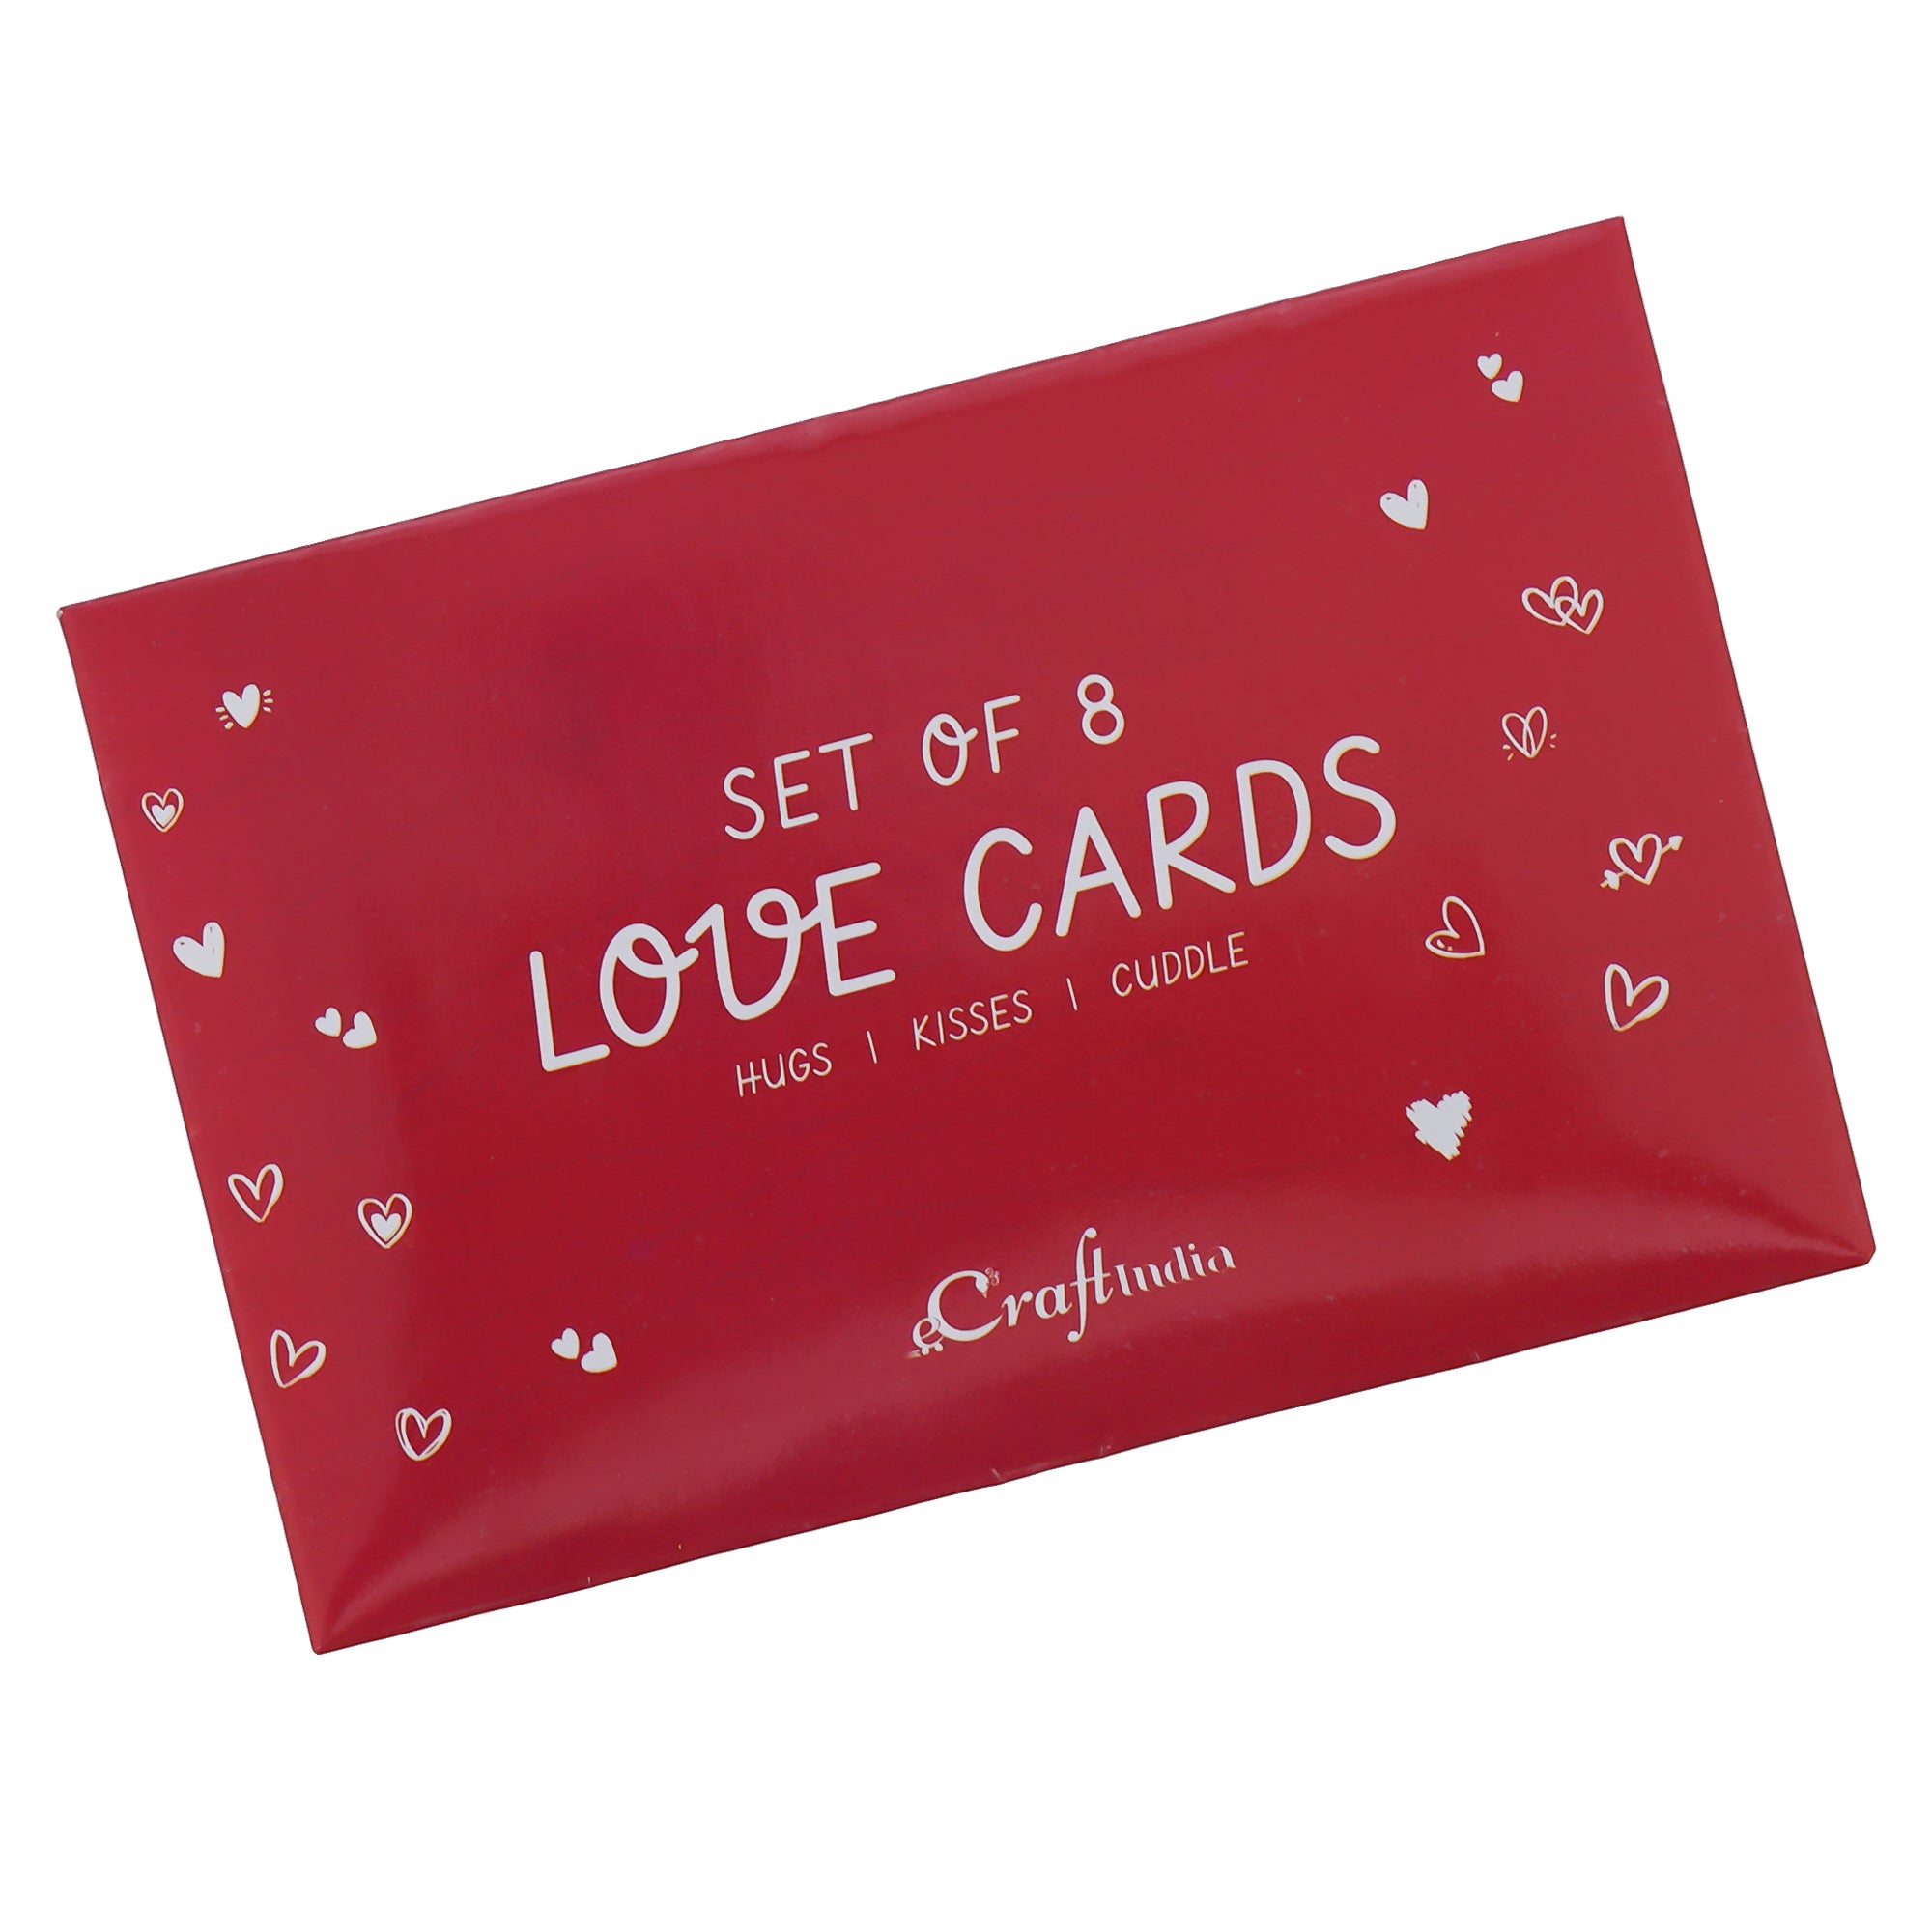 Valentine Combo of Pack of 8 Love Gift Cards, "20 Reasons Why I Love You" Printed on Little Red Hearts Decorative Wooden Gift Set Box, Red Roses Bouquet and White, Red Teddy Bear Valentine's Rectangle Shaped Gift Box 7